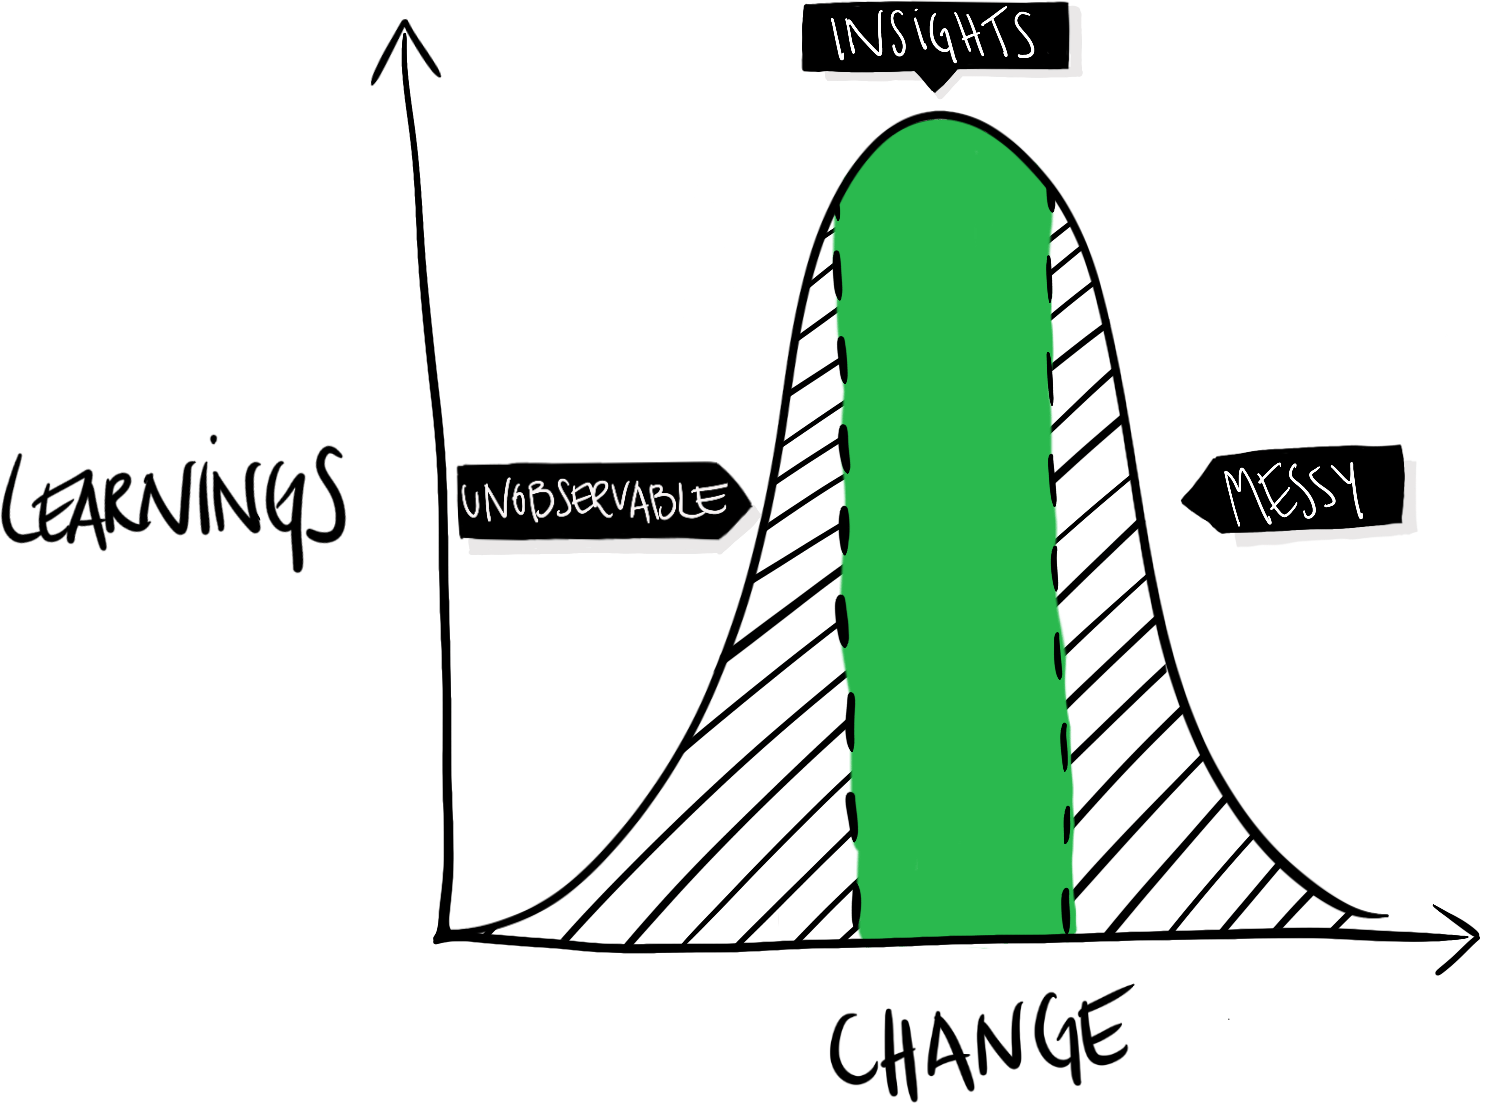 A/B-test learning vs amount of change